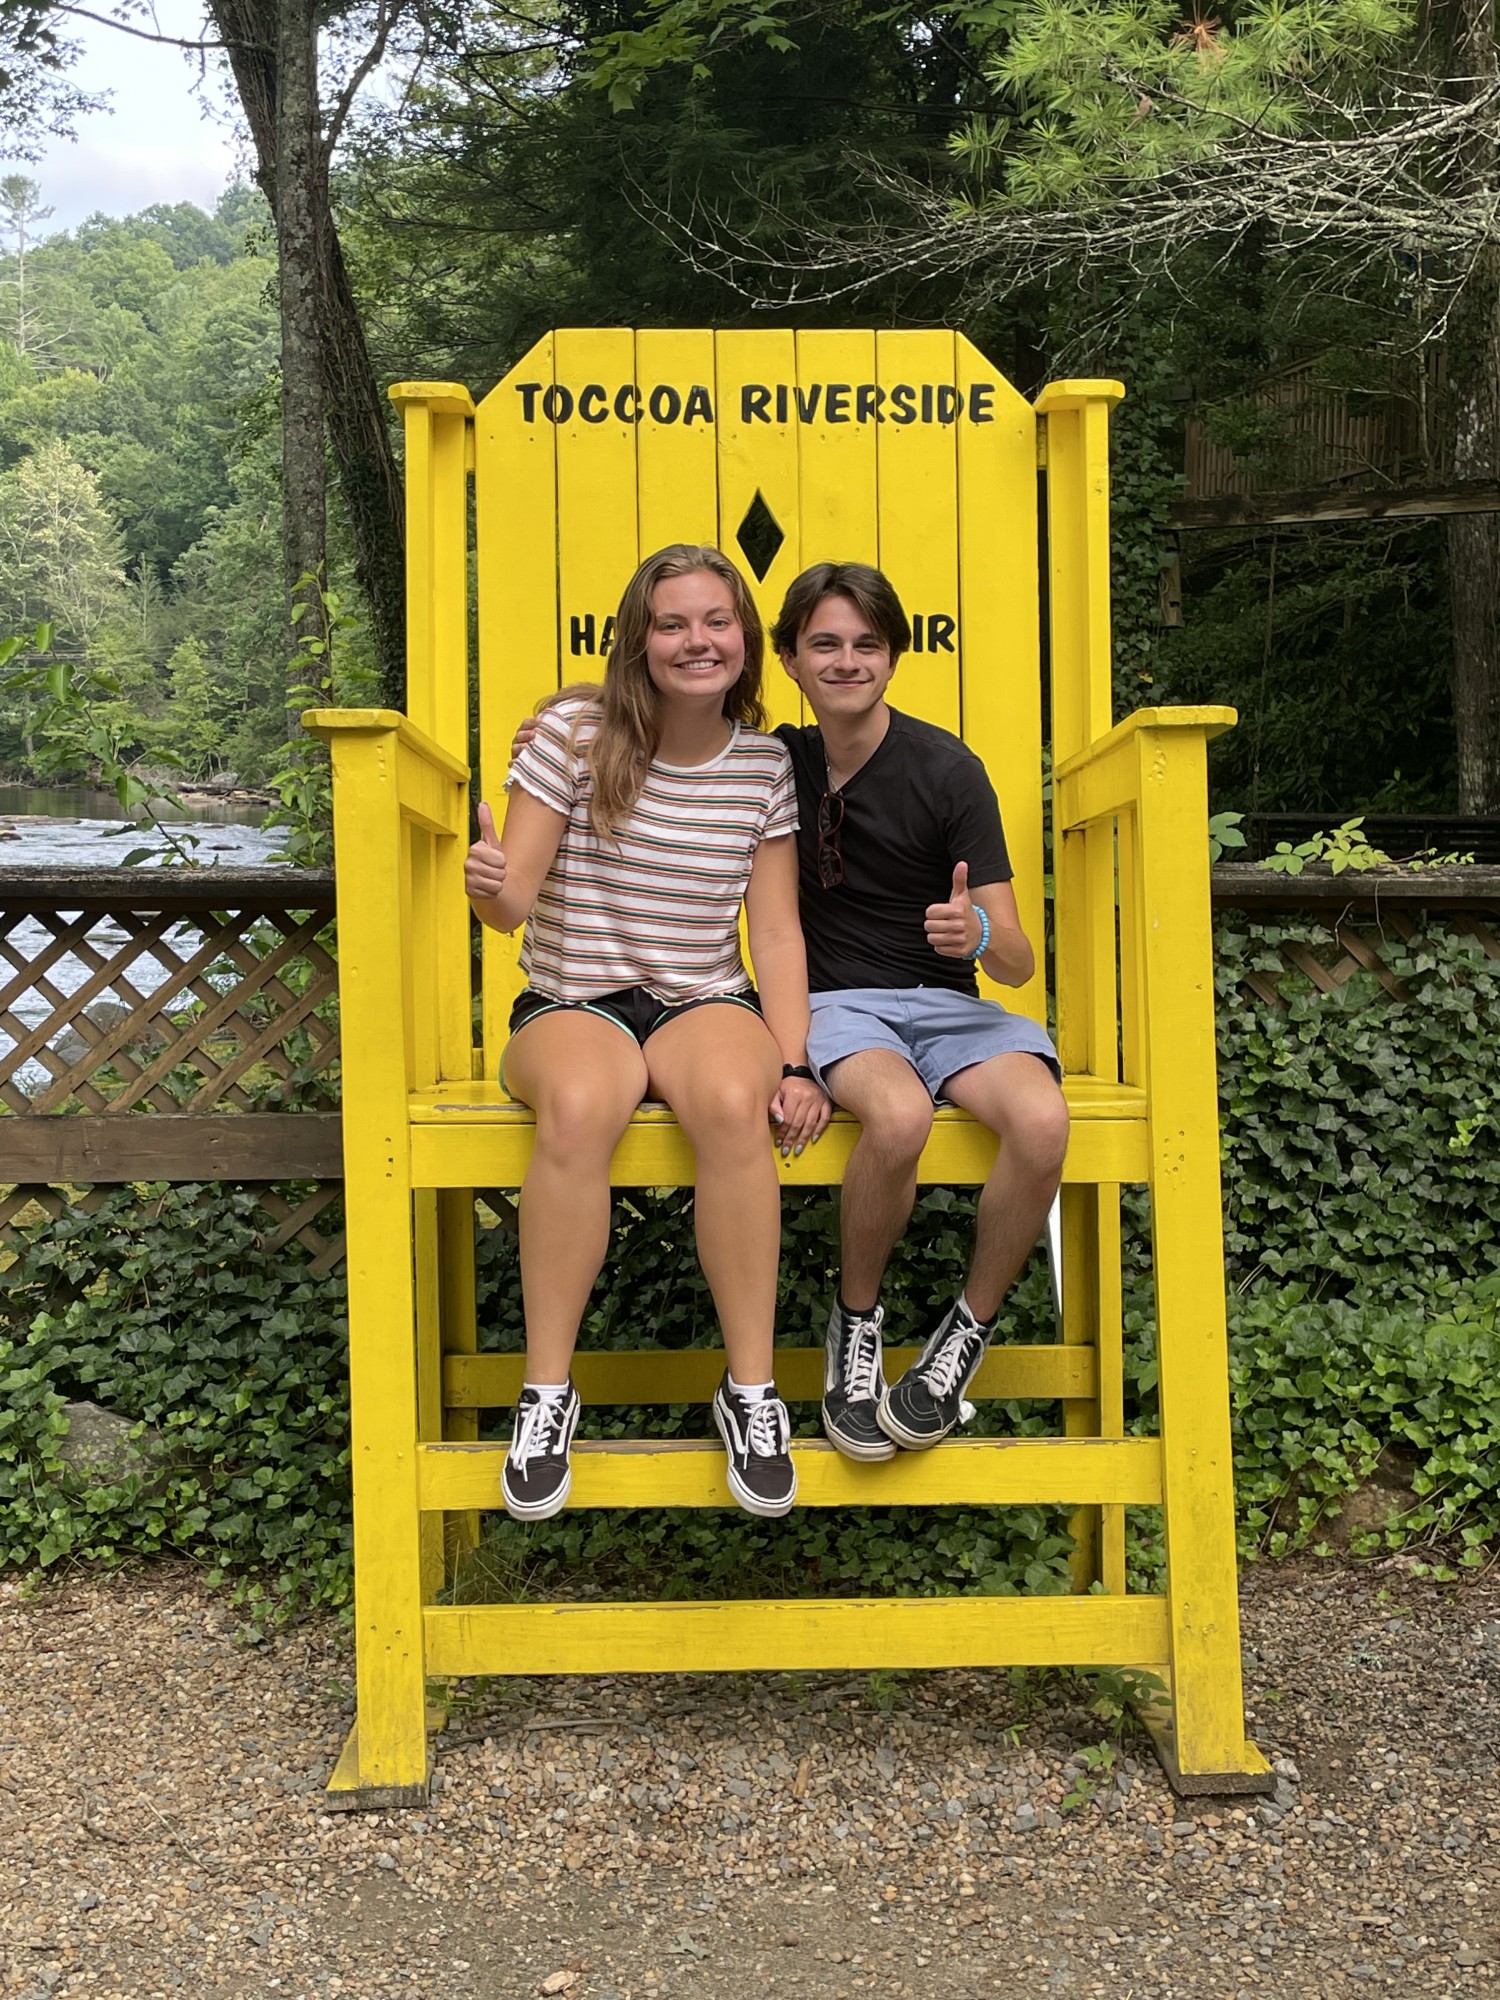 Photo of Meredith Crabtree and Daniel Wittenberg sitting on a yellow chair at Toccoa Riverside Restaurant while Wittenberg was visiting Crabtree's family in Blue Ridge, Georgia, on Thursday, July 21, 2022. The couple emphasizes the importance of self-care in their relationship. (Photo courtesy of Daniel Wittenberg.)